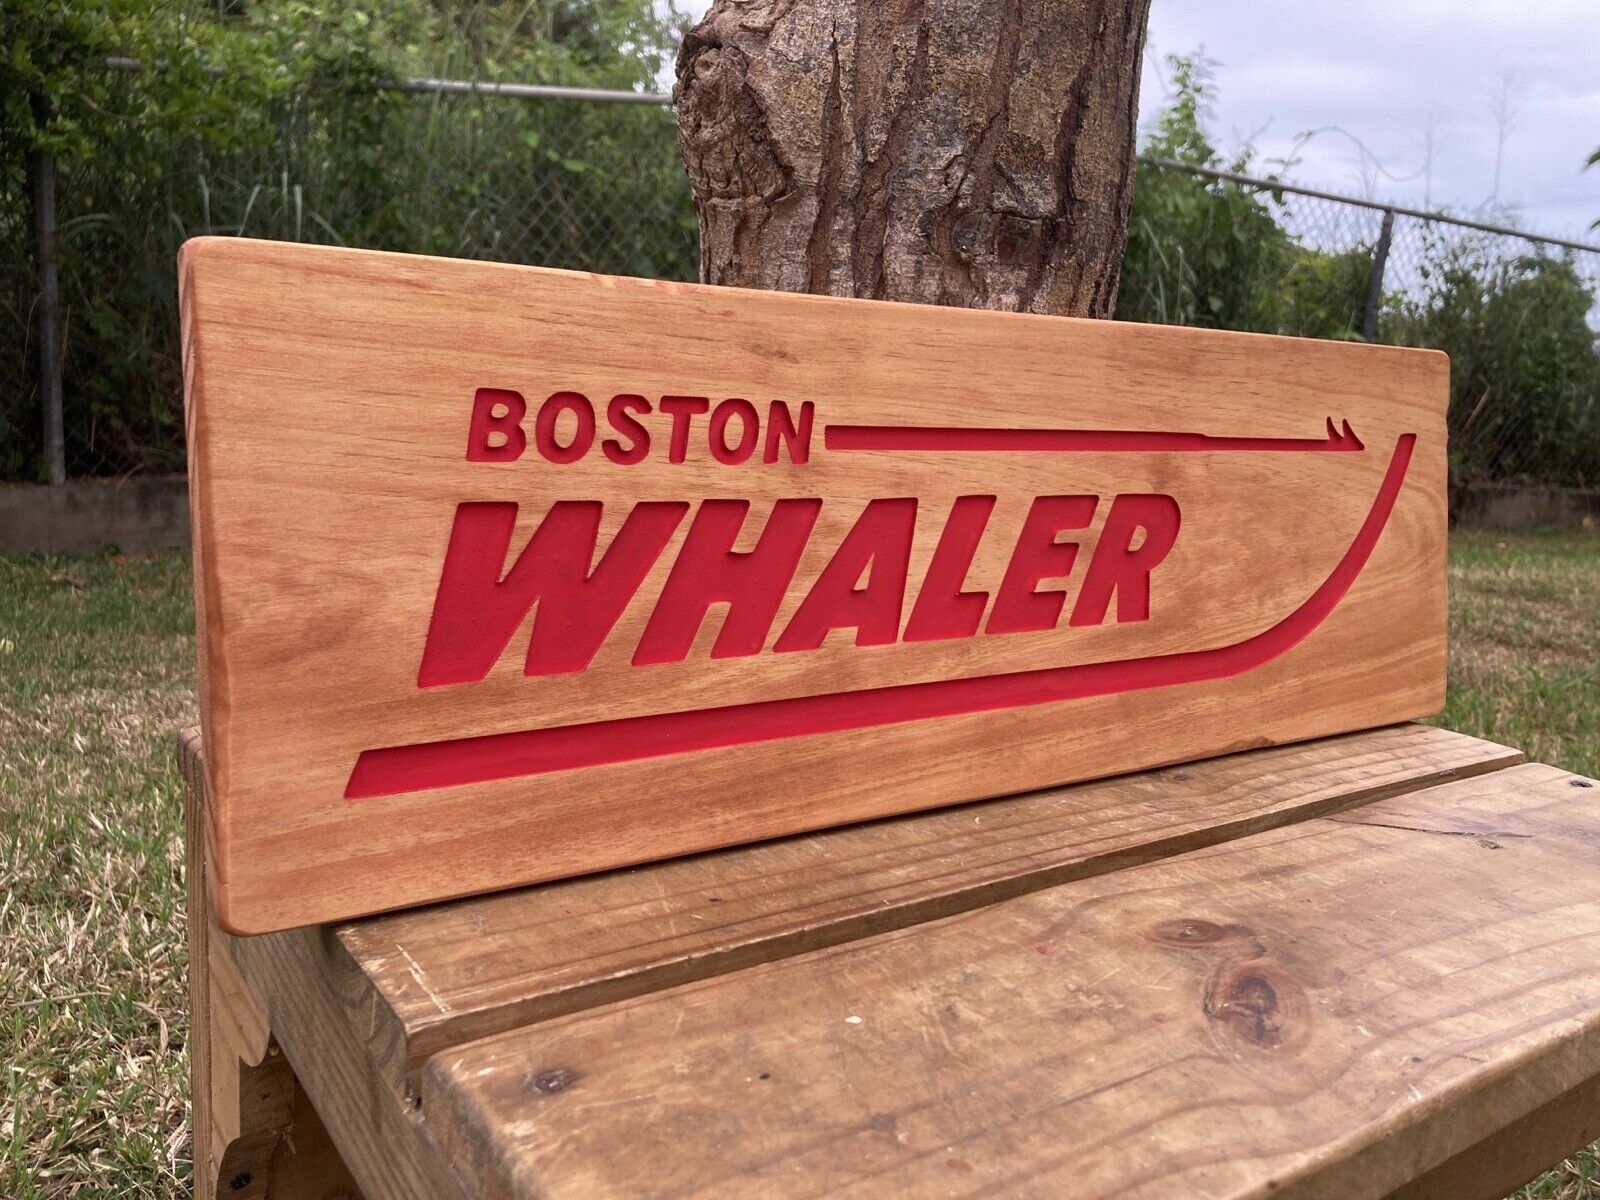 Boston Whaler Carved Wood Sign Nautical Rustic Vintage Antique Look